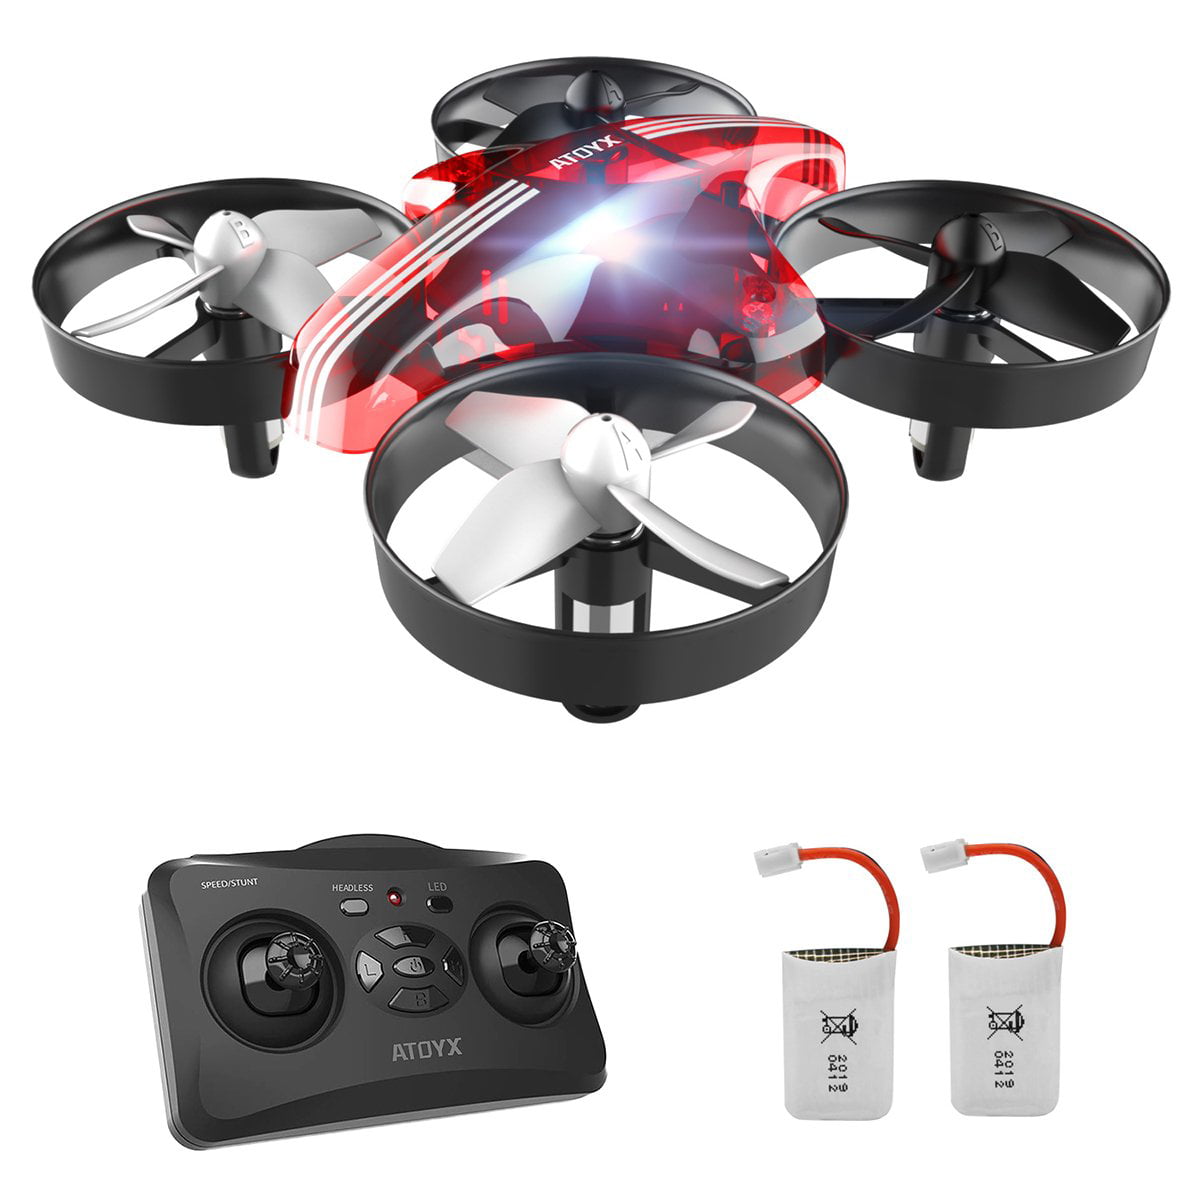 Mini Drone for Kids and Beginners Details about   Drone Mini Drones Quadcopter with LED Lights 